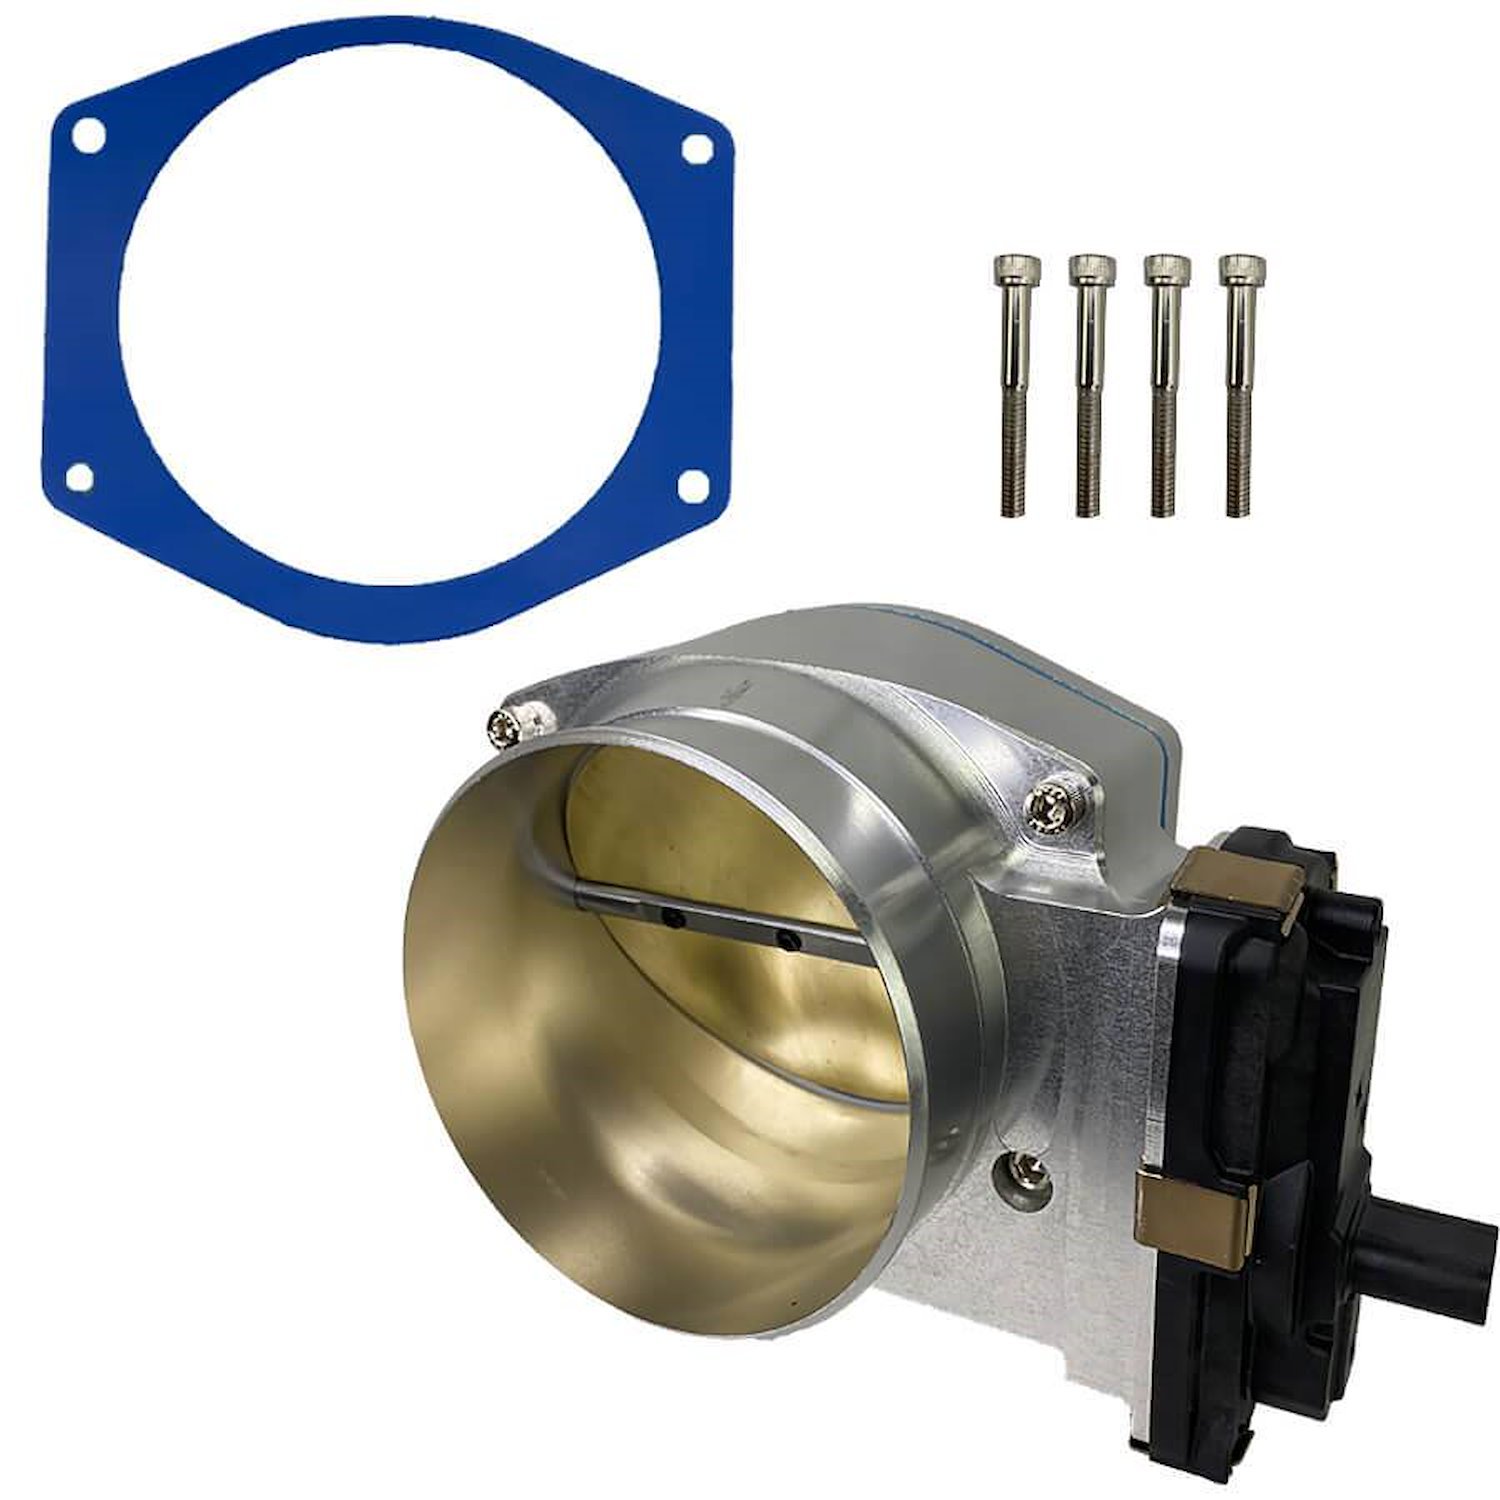 Drive-By-Wire Throttle Body GM LT1/LT4/LT5, 103 mm - Natural Finish